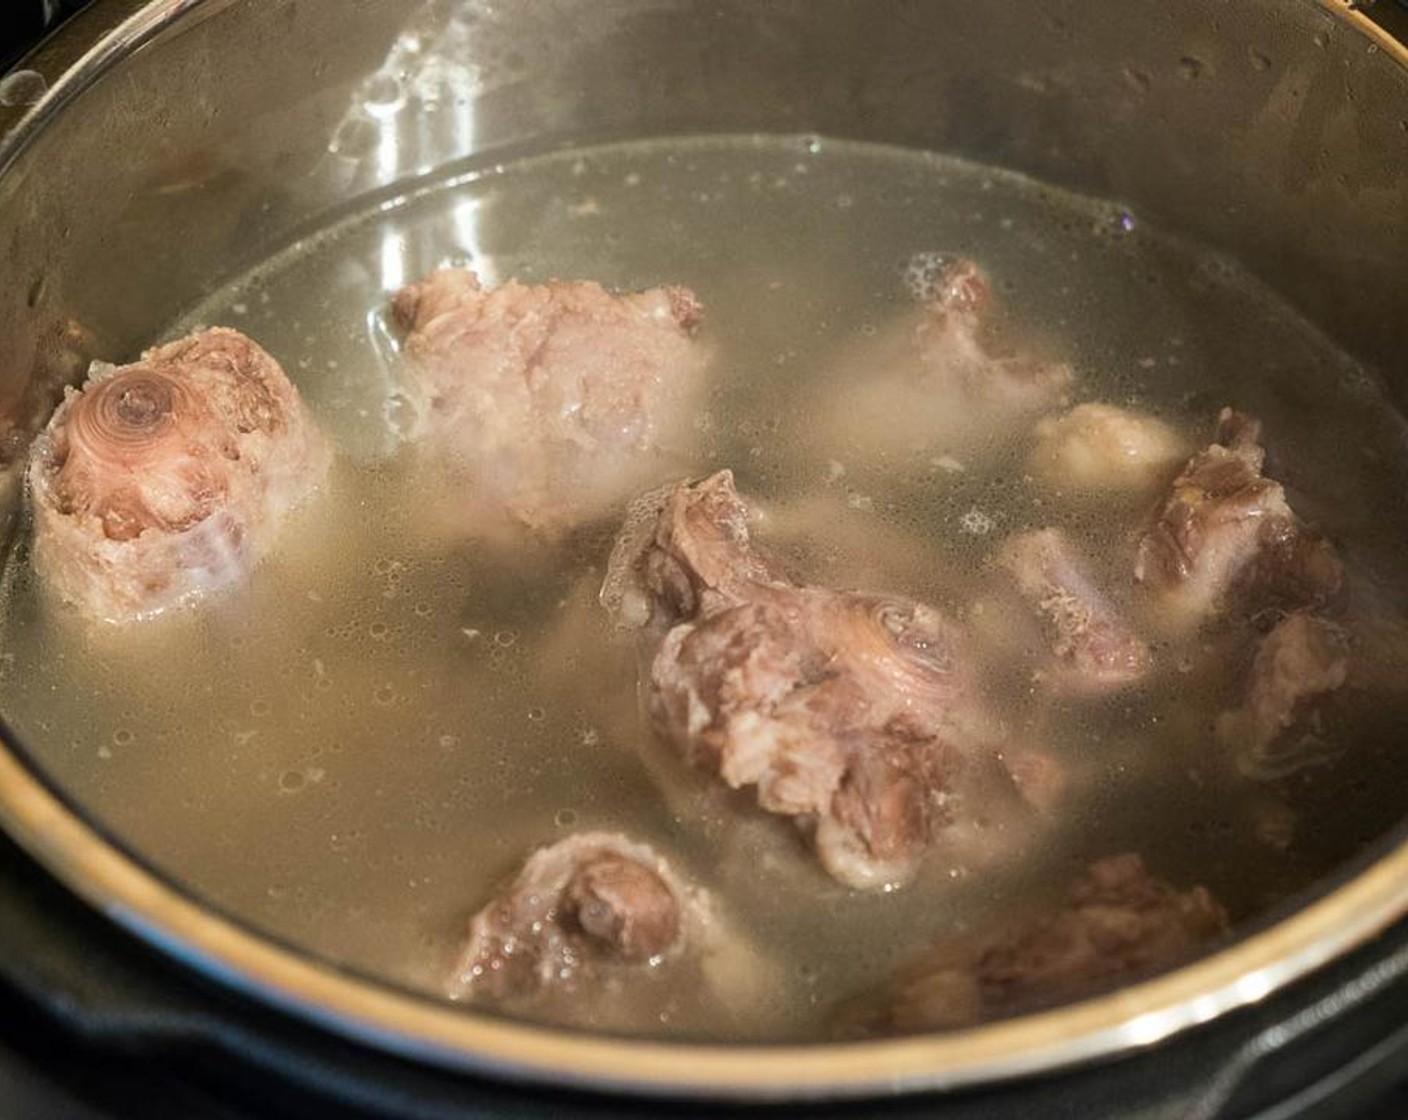 step 4 The oxtail might leave a brown residue on the inside of the big pot you used to boil it. Wash the pot thoroughly before using in the following steps.